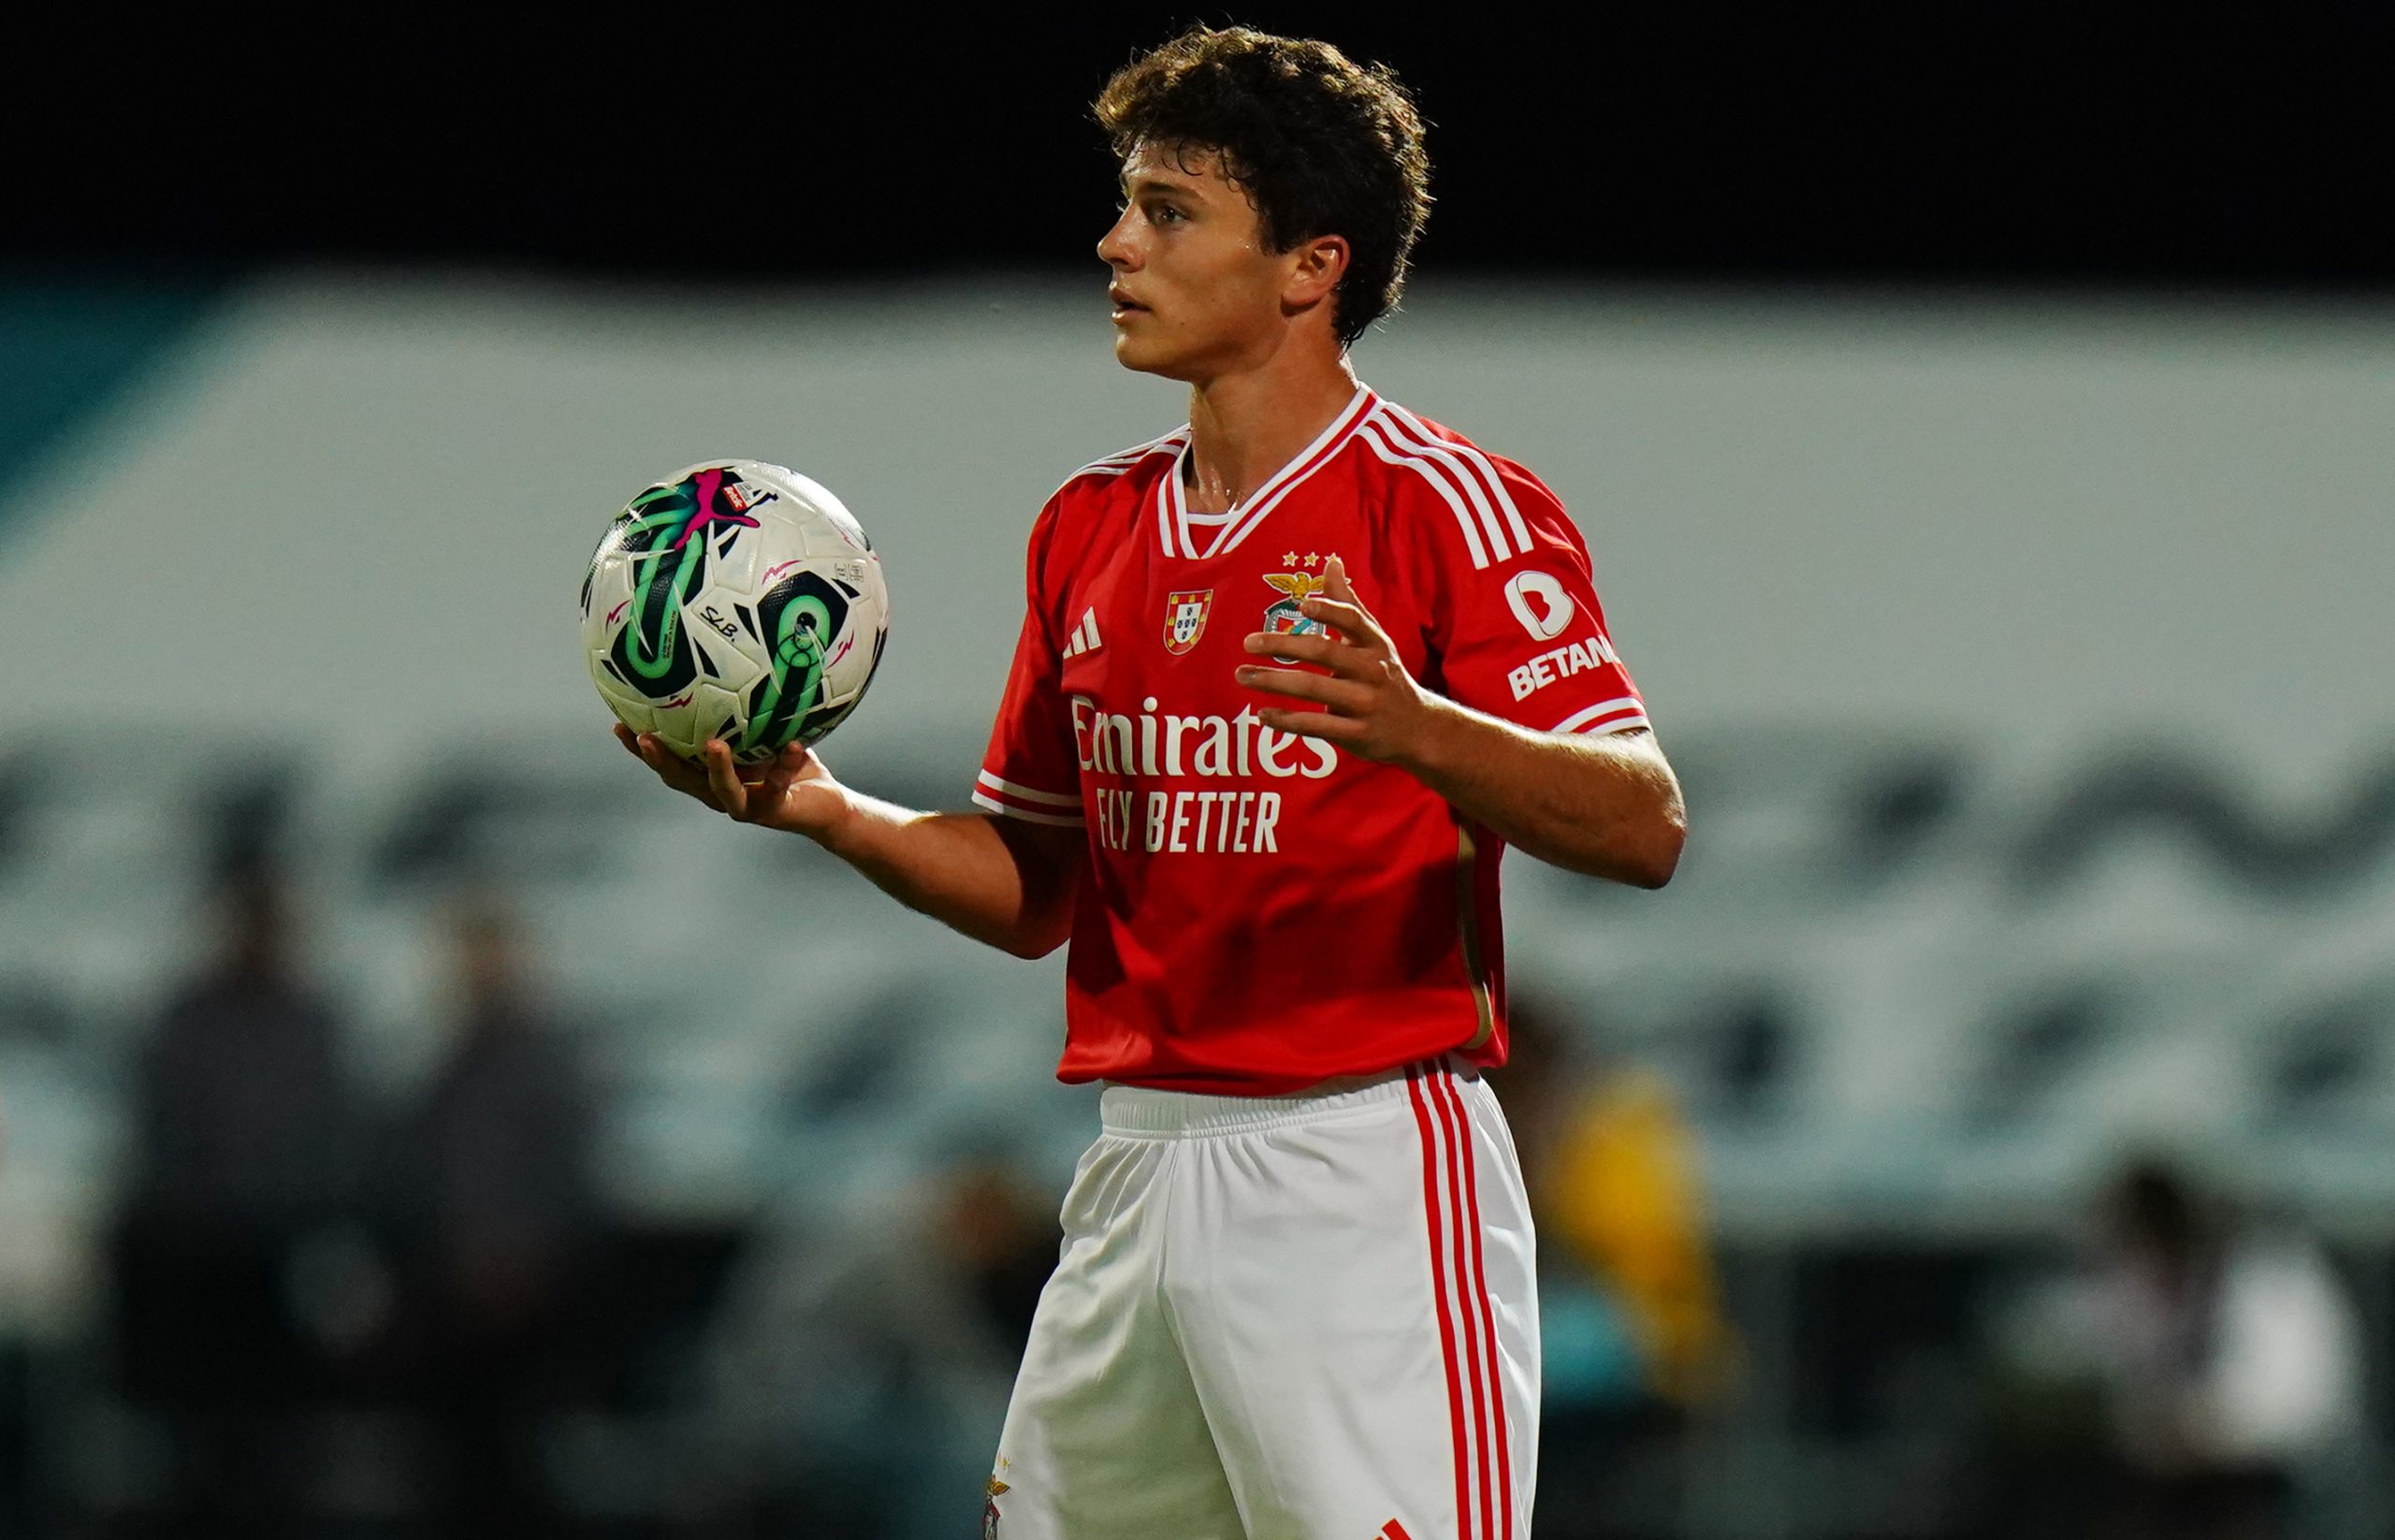 Juventus is closely following this young Portuguese talent